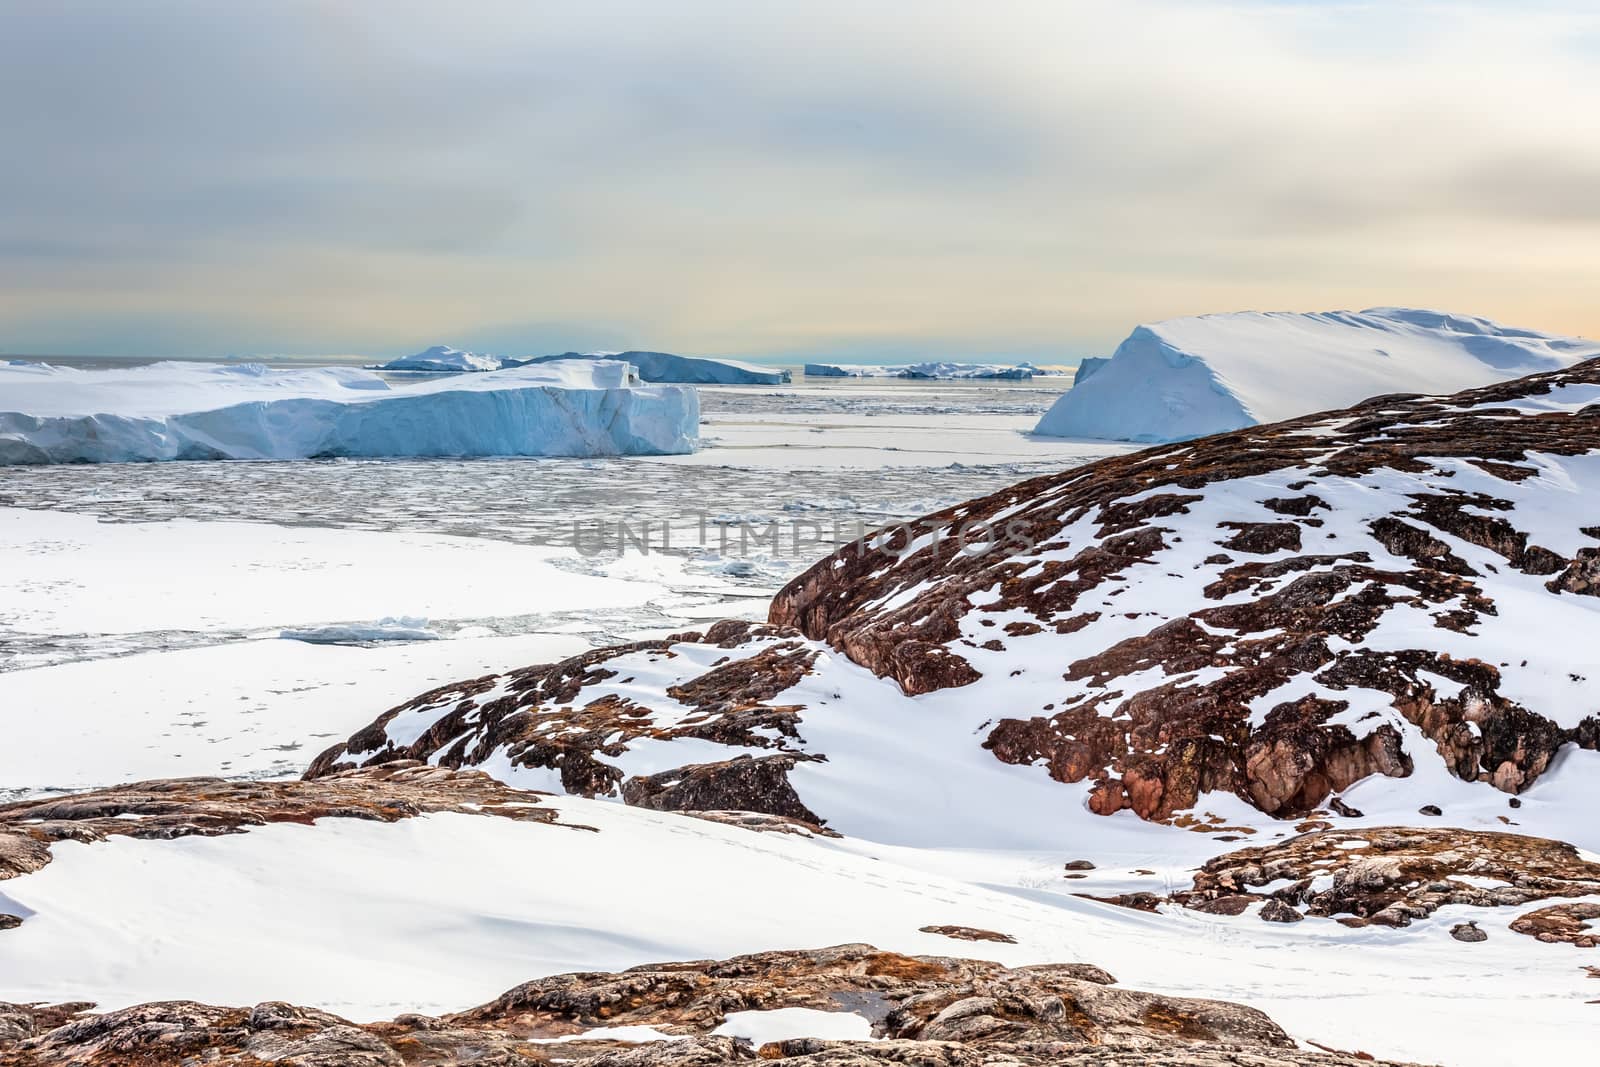 Ice fields and drifting icebergs with rocks in foreground, at the Ilulissat fjord, North Greenland